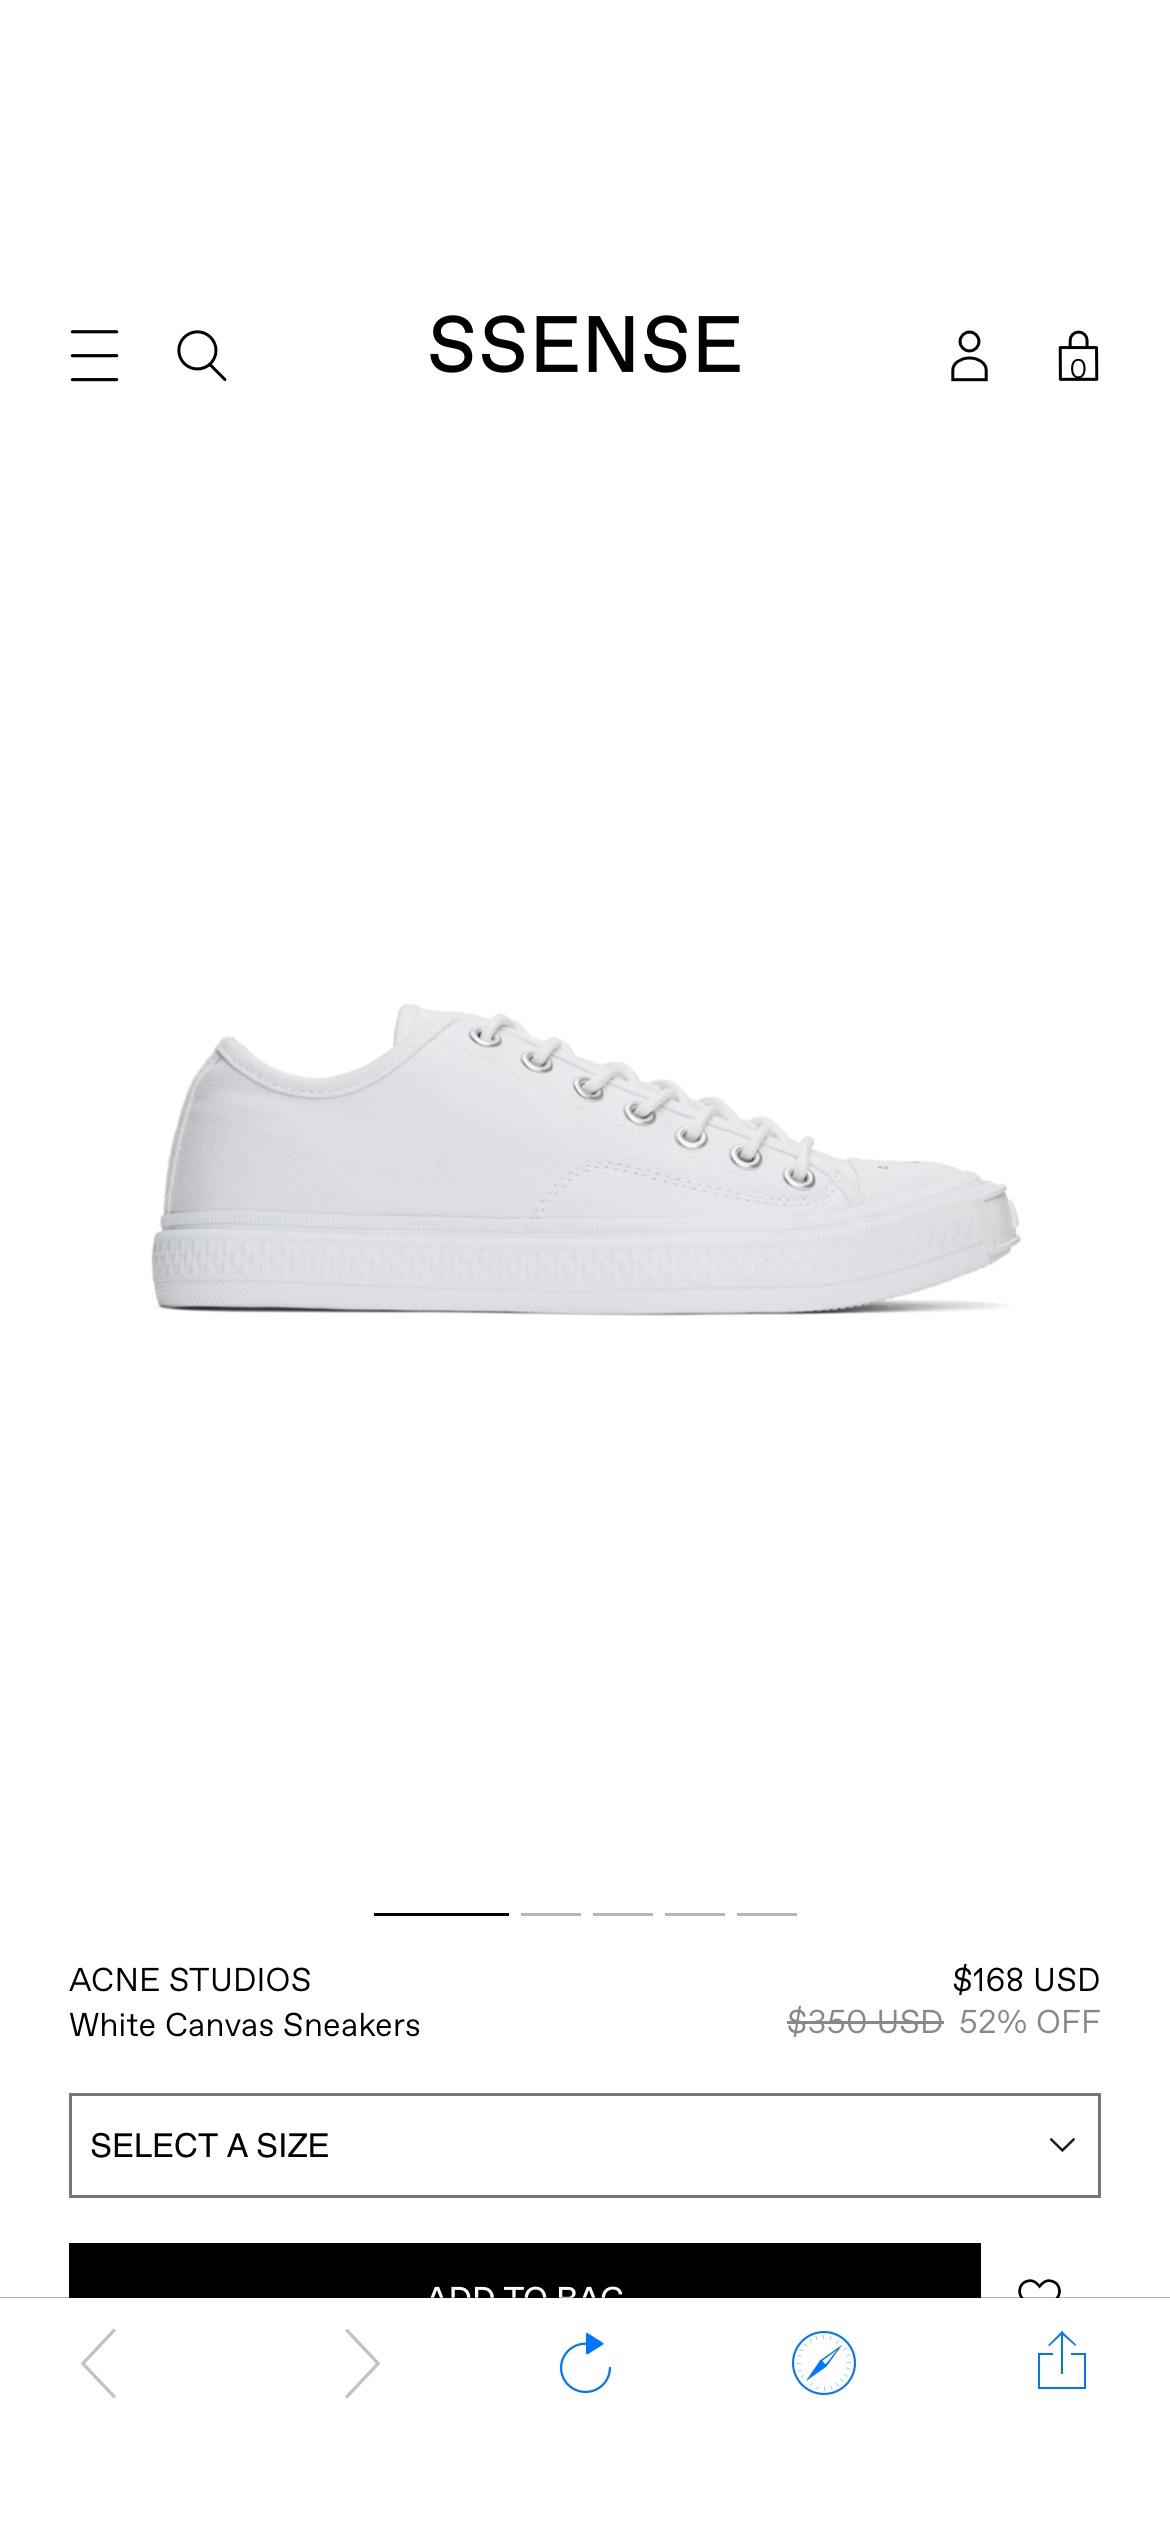 White Canvas Sneakers by Acne Studios on Sale